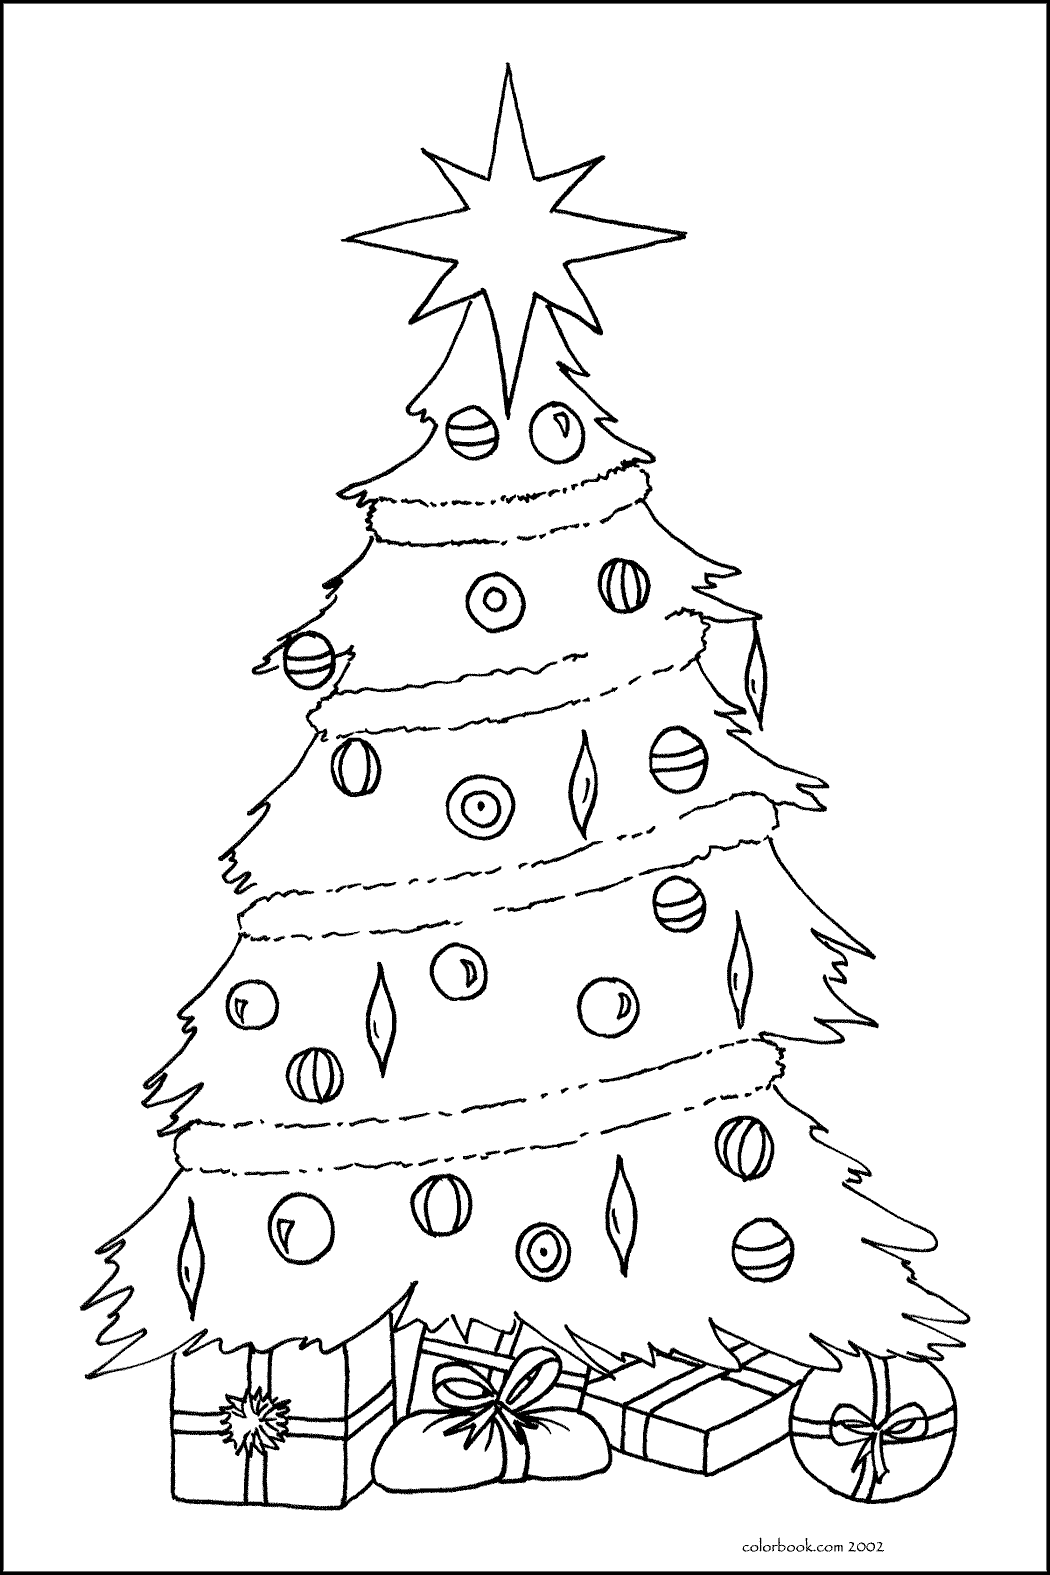 christmas-tree-coloring-pages-coloring-pages-for-kids